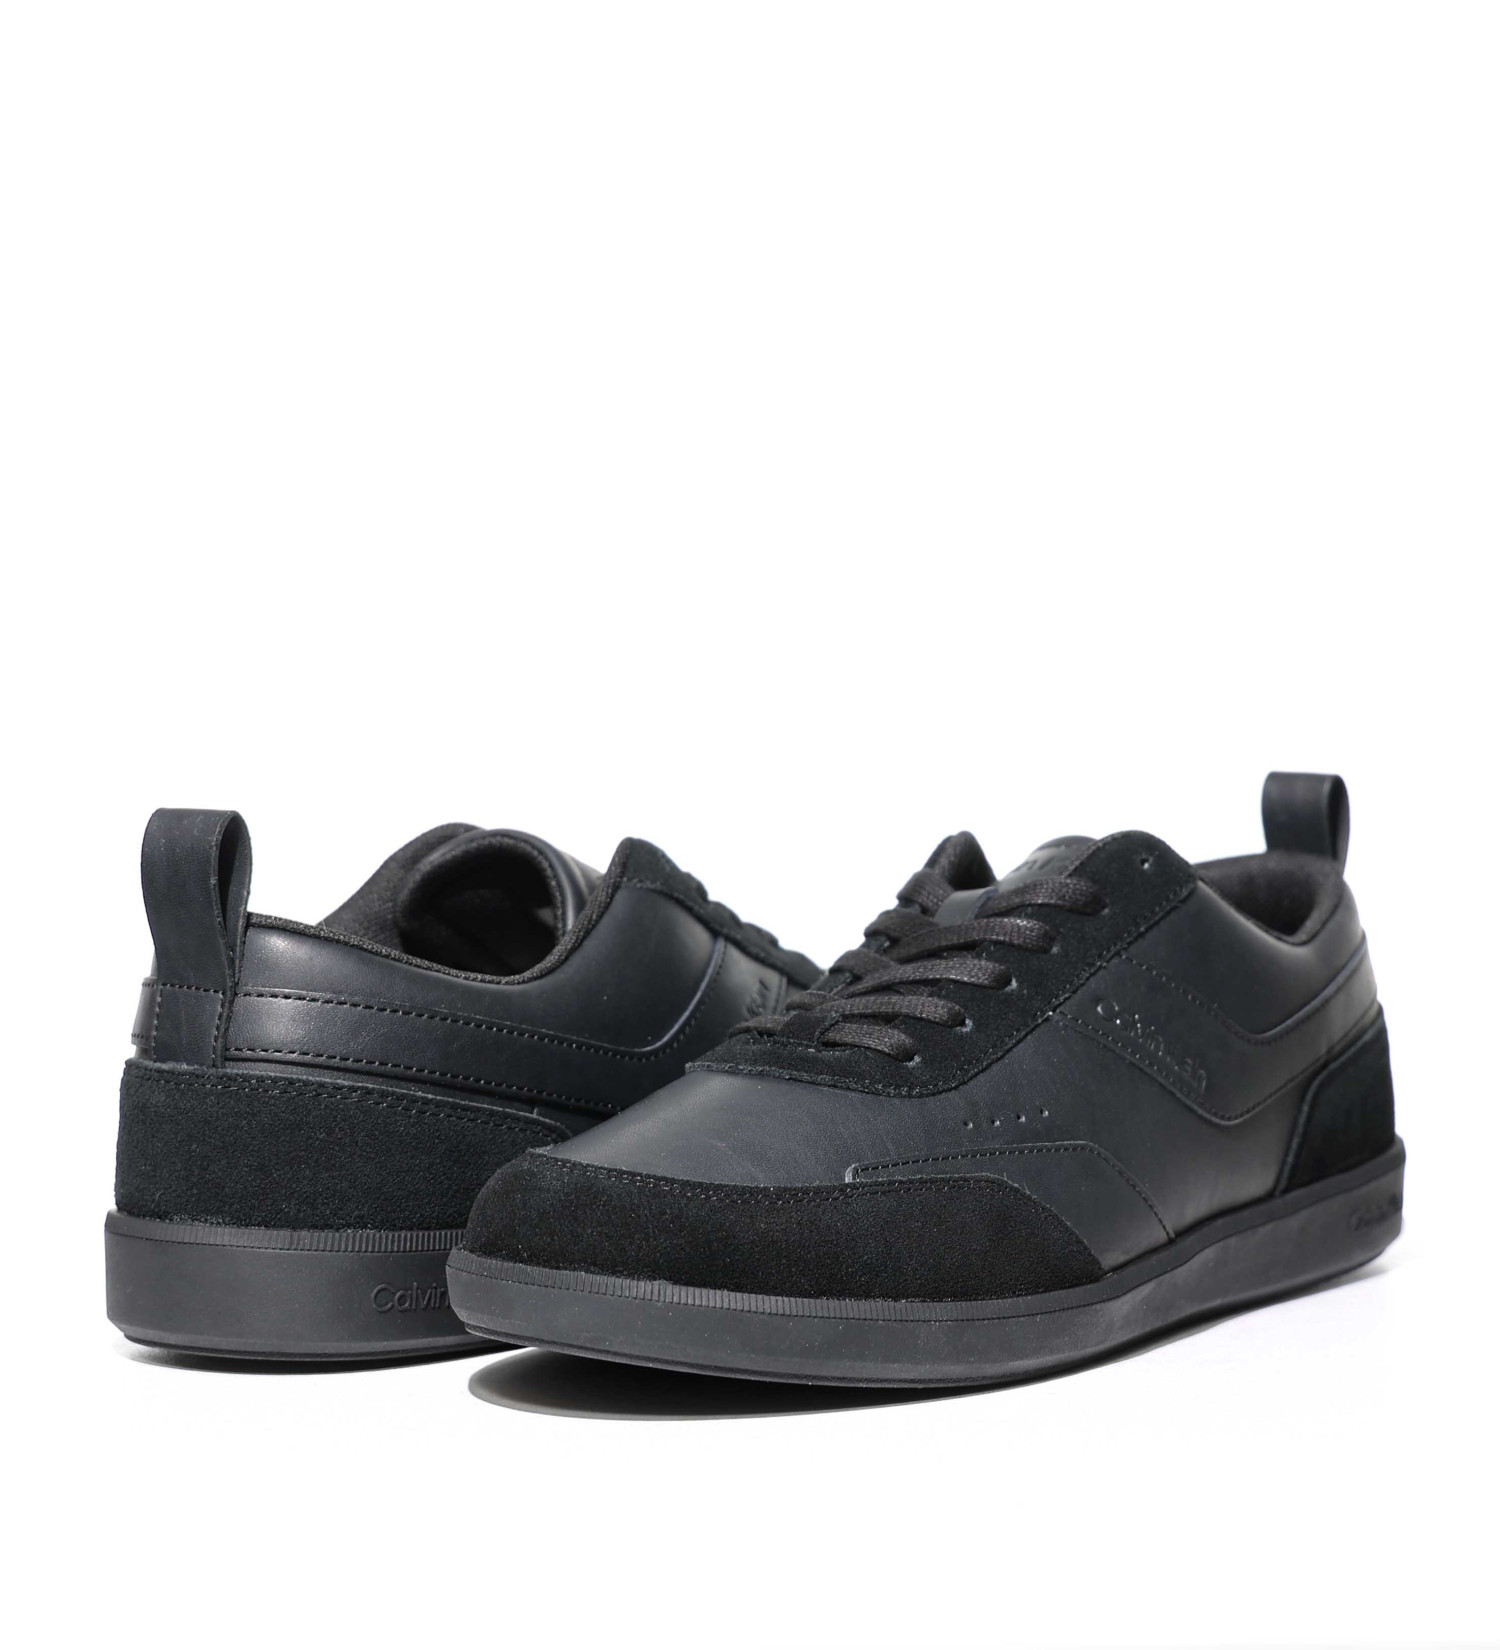 CALVIN KLEIN - LOW TOP LACE UP LTH MIX Size 41